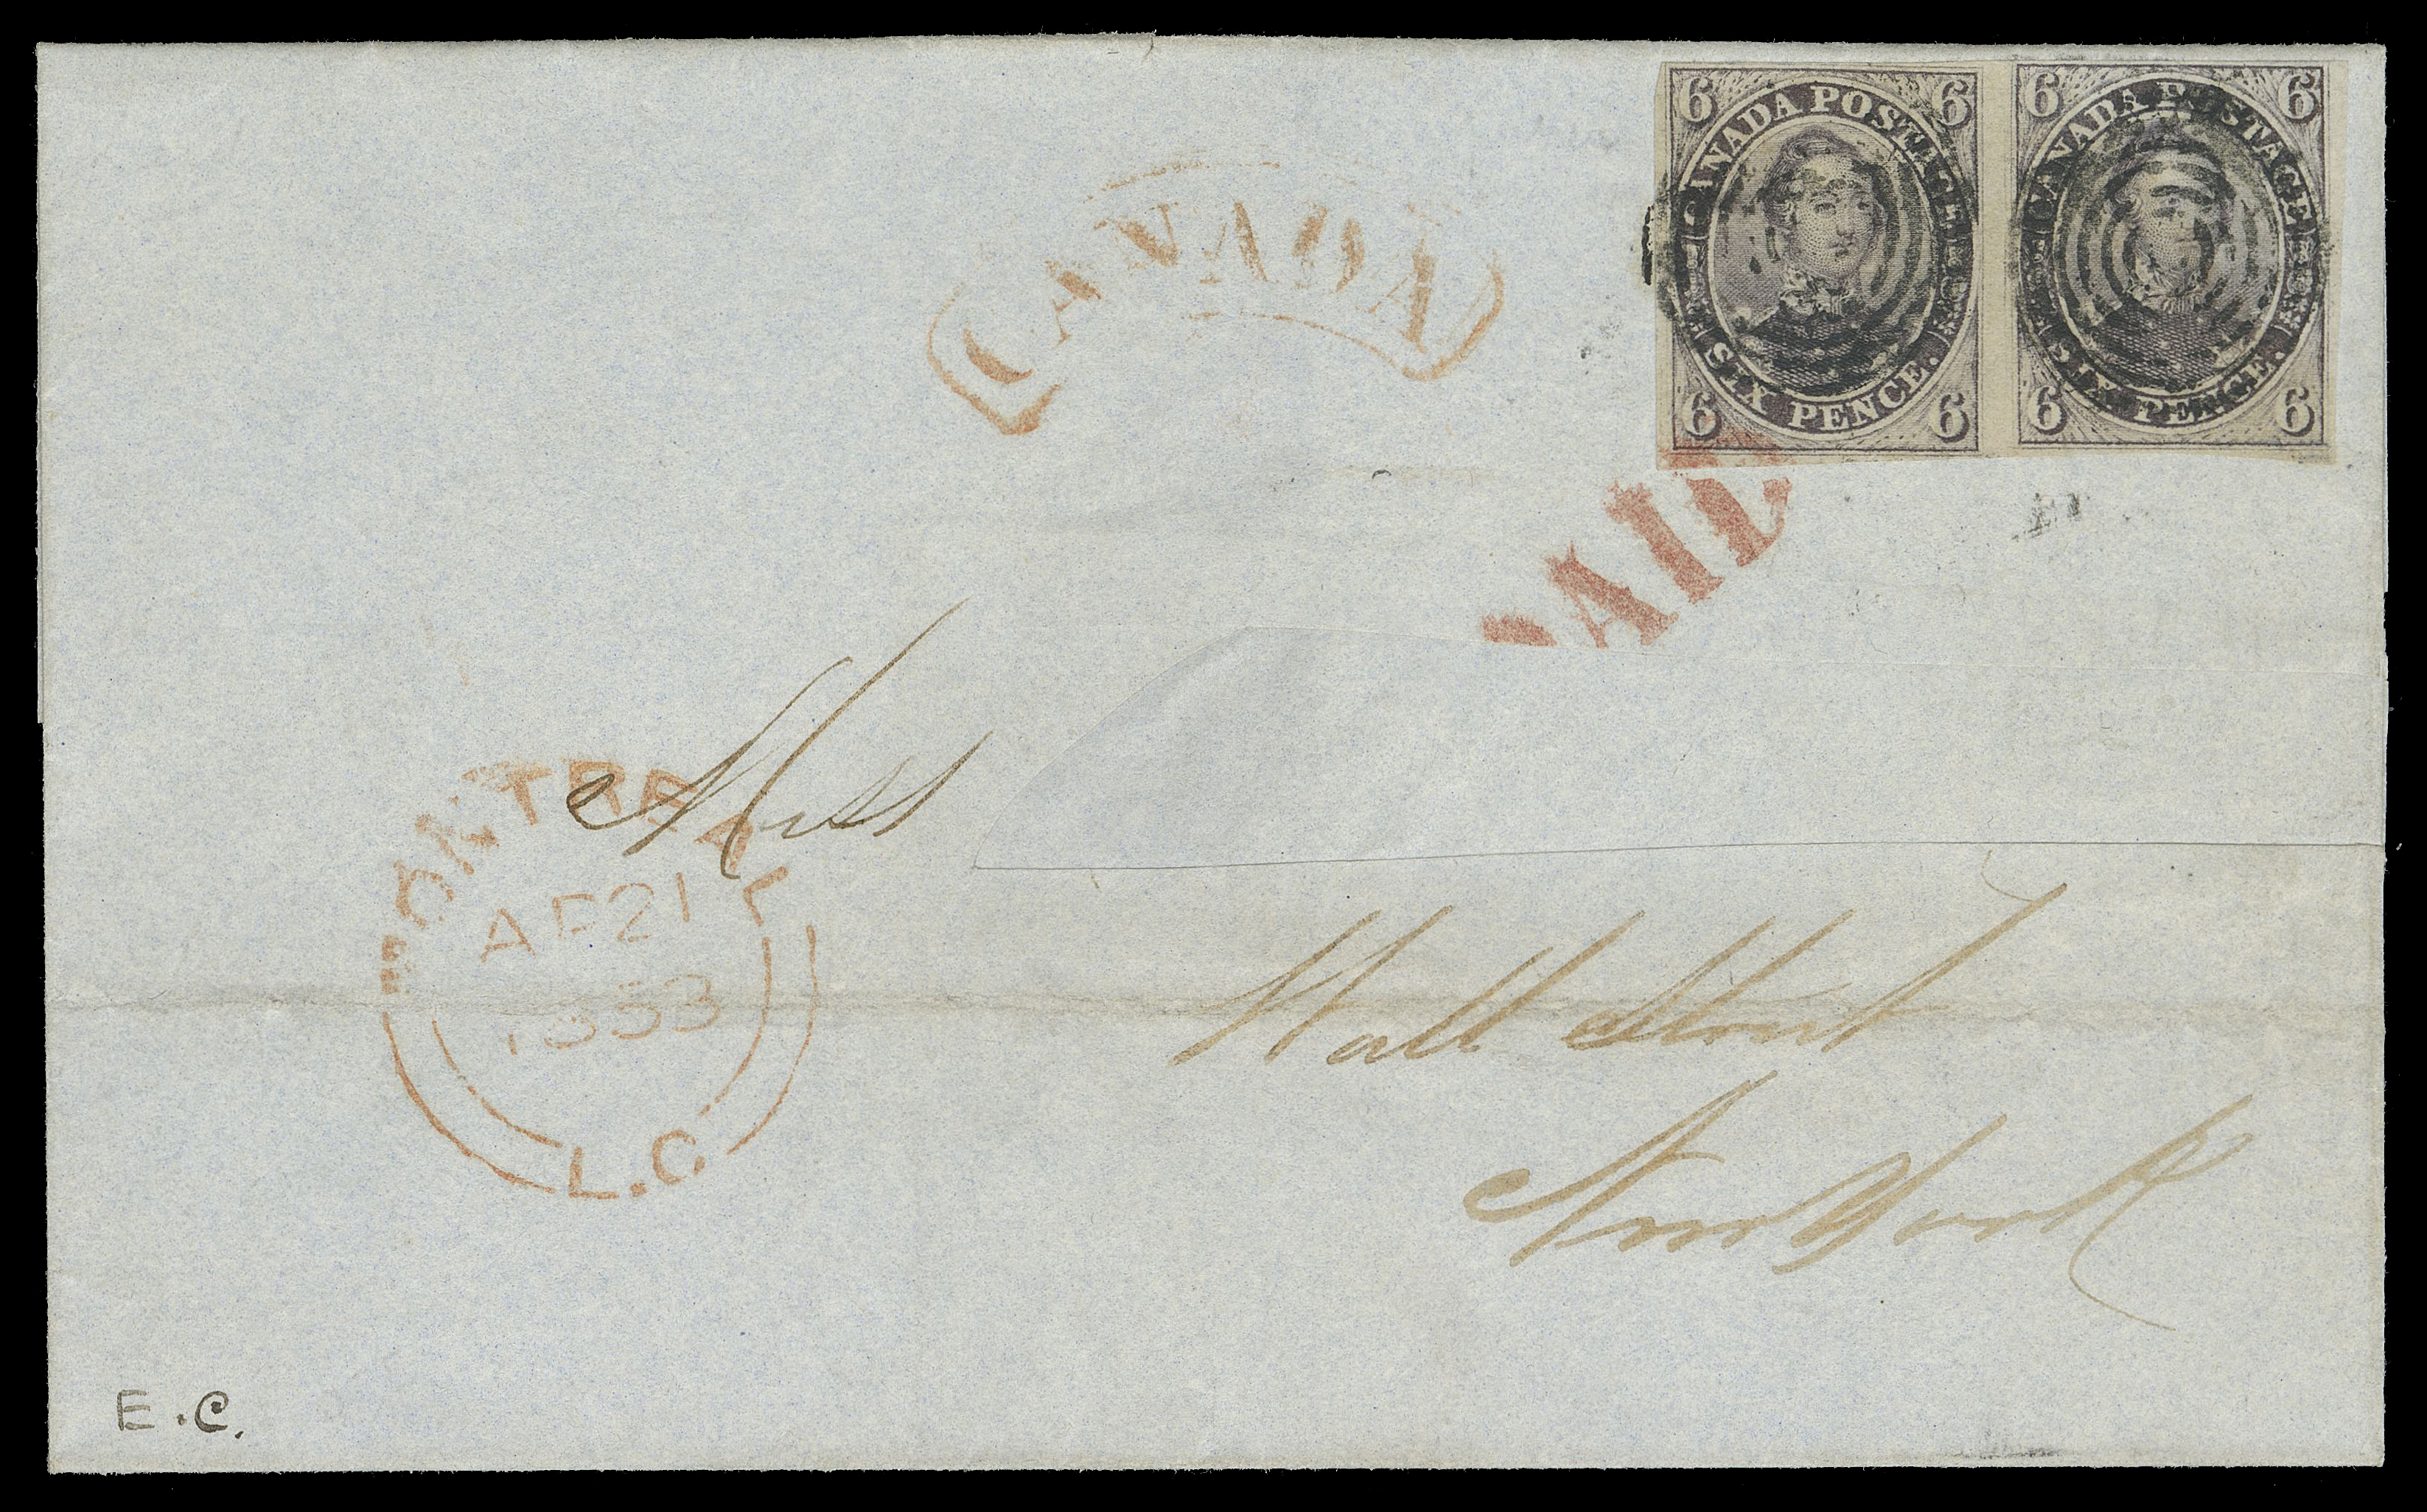 SIX PENCE AND TEN CENTS  1853 (April 21) Cover from Montreal to New York, part of addressee excised, bearing a horizontal pair of 6p slate violet with just clear to large margins, stuck by concentric rings, left stamp further tied by PAID handstamp in red, Montreal double arc dispatch and border exchange arc "CANADA" handstamp in red; no backstamp as customary for mail to the US A scarce double weight 12 pence rate cover, Fine (Unitrade 2)

Provenance: Alfred Caspary, Sale 5 - British North America, H.R. Harmer, Inc., New York, October 1956; Lot 24